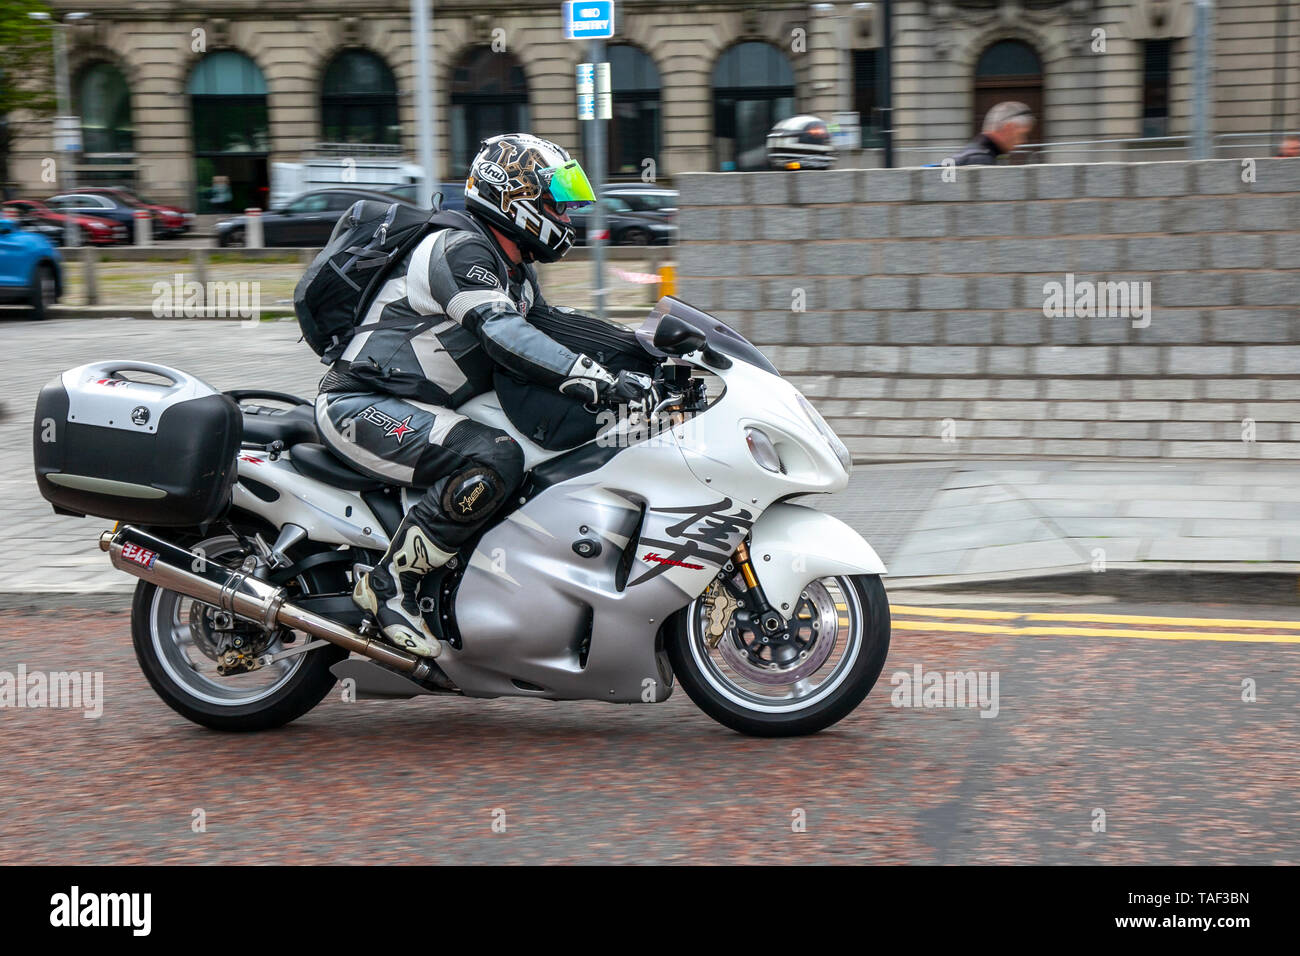 Liverpool, Merseyside. 24th May, 2019 UK Weather: Fine, calm condition as up to 200 motorcyclists queue to board the morning ferry to the Isle of Man to attend the island TT races.  Extra ferry services are to be added to cope with the large demand for spectators travelling to attend this year’s top motor sport week of qualifying event and the fastest road race on the planet. Credit: MediaWorldImages/AlamyLiveNews Stock Photo